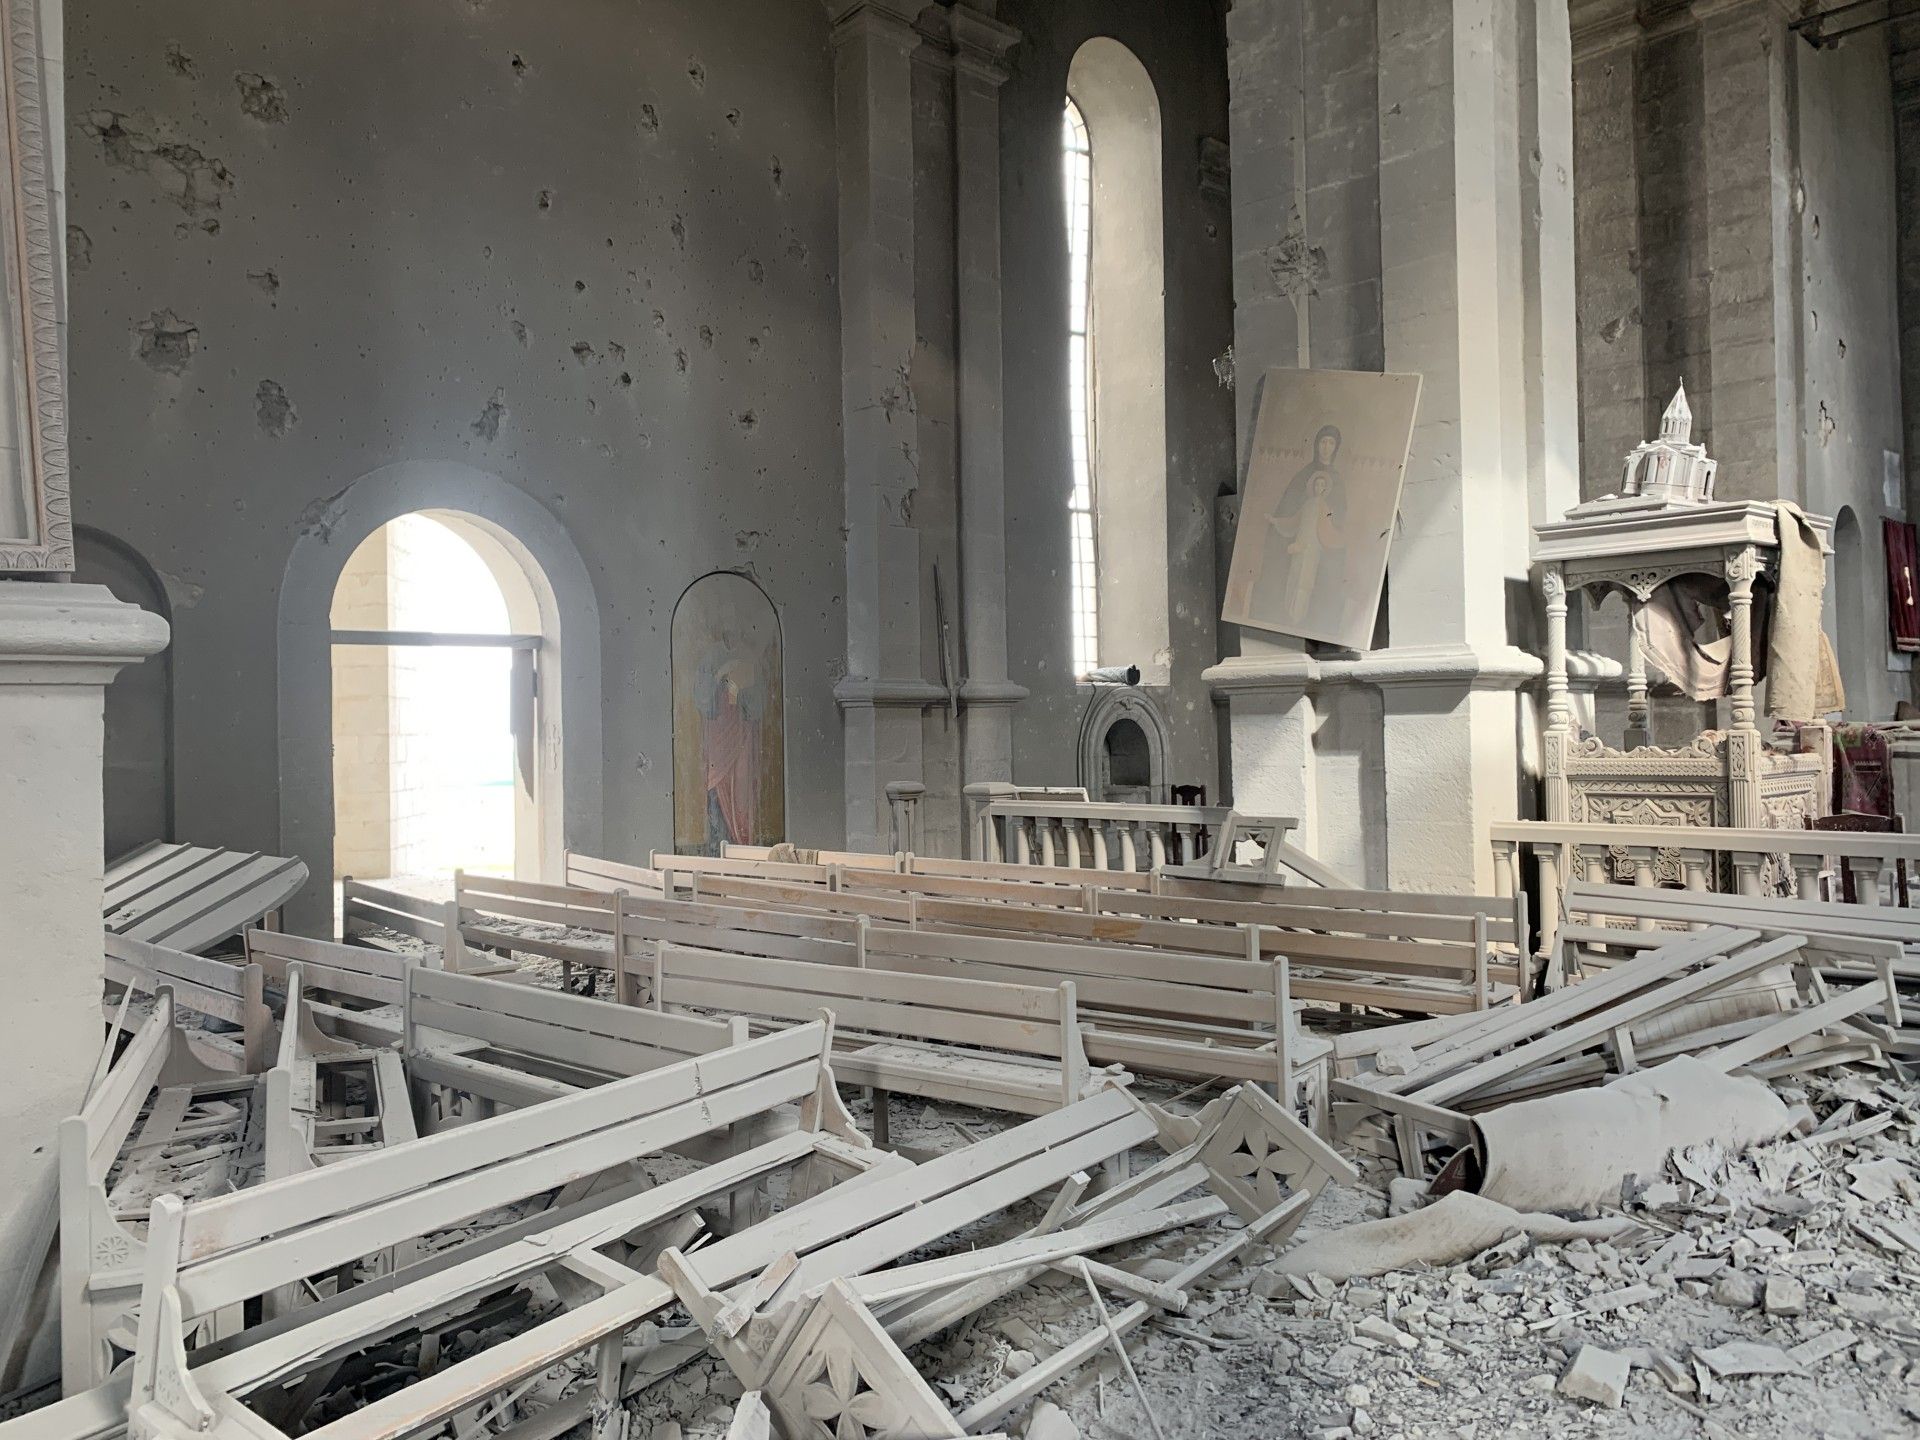 The Ghazanchetsots Cathedral in Shushi which was hit twice with precision strikes that injured a journalist and several others. Image by Simon Ostrovsky/Newlines. Nagorno-Karabakh, 2020.